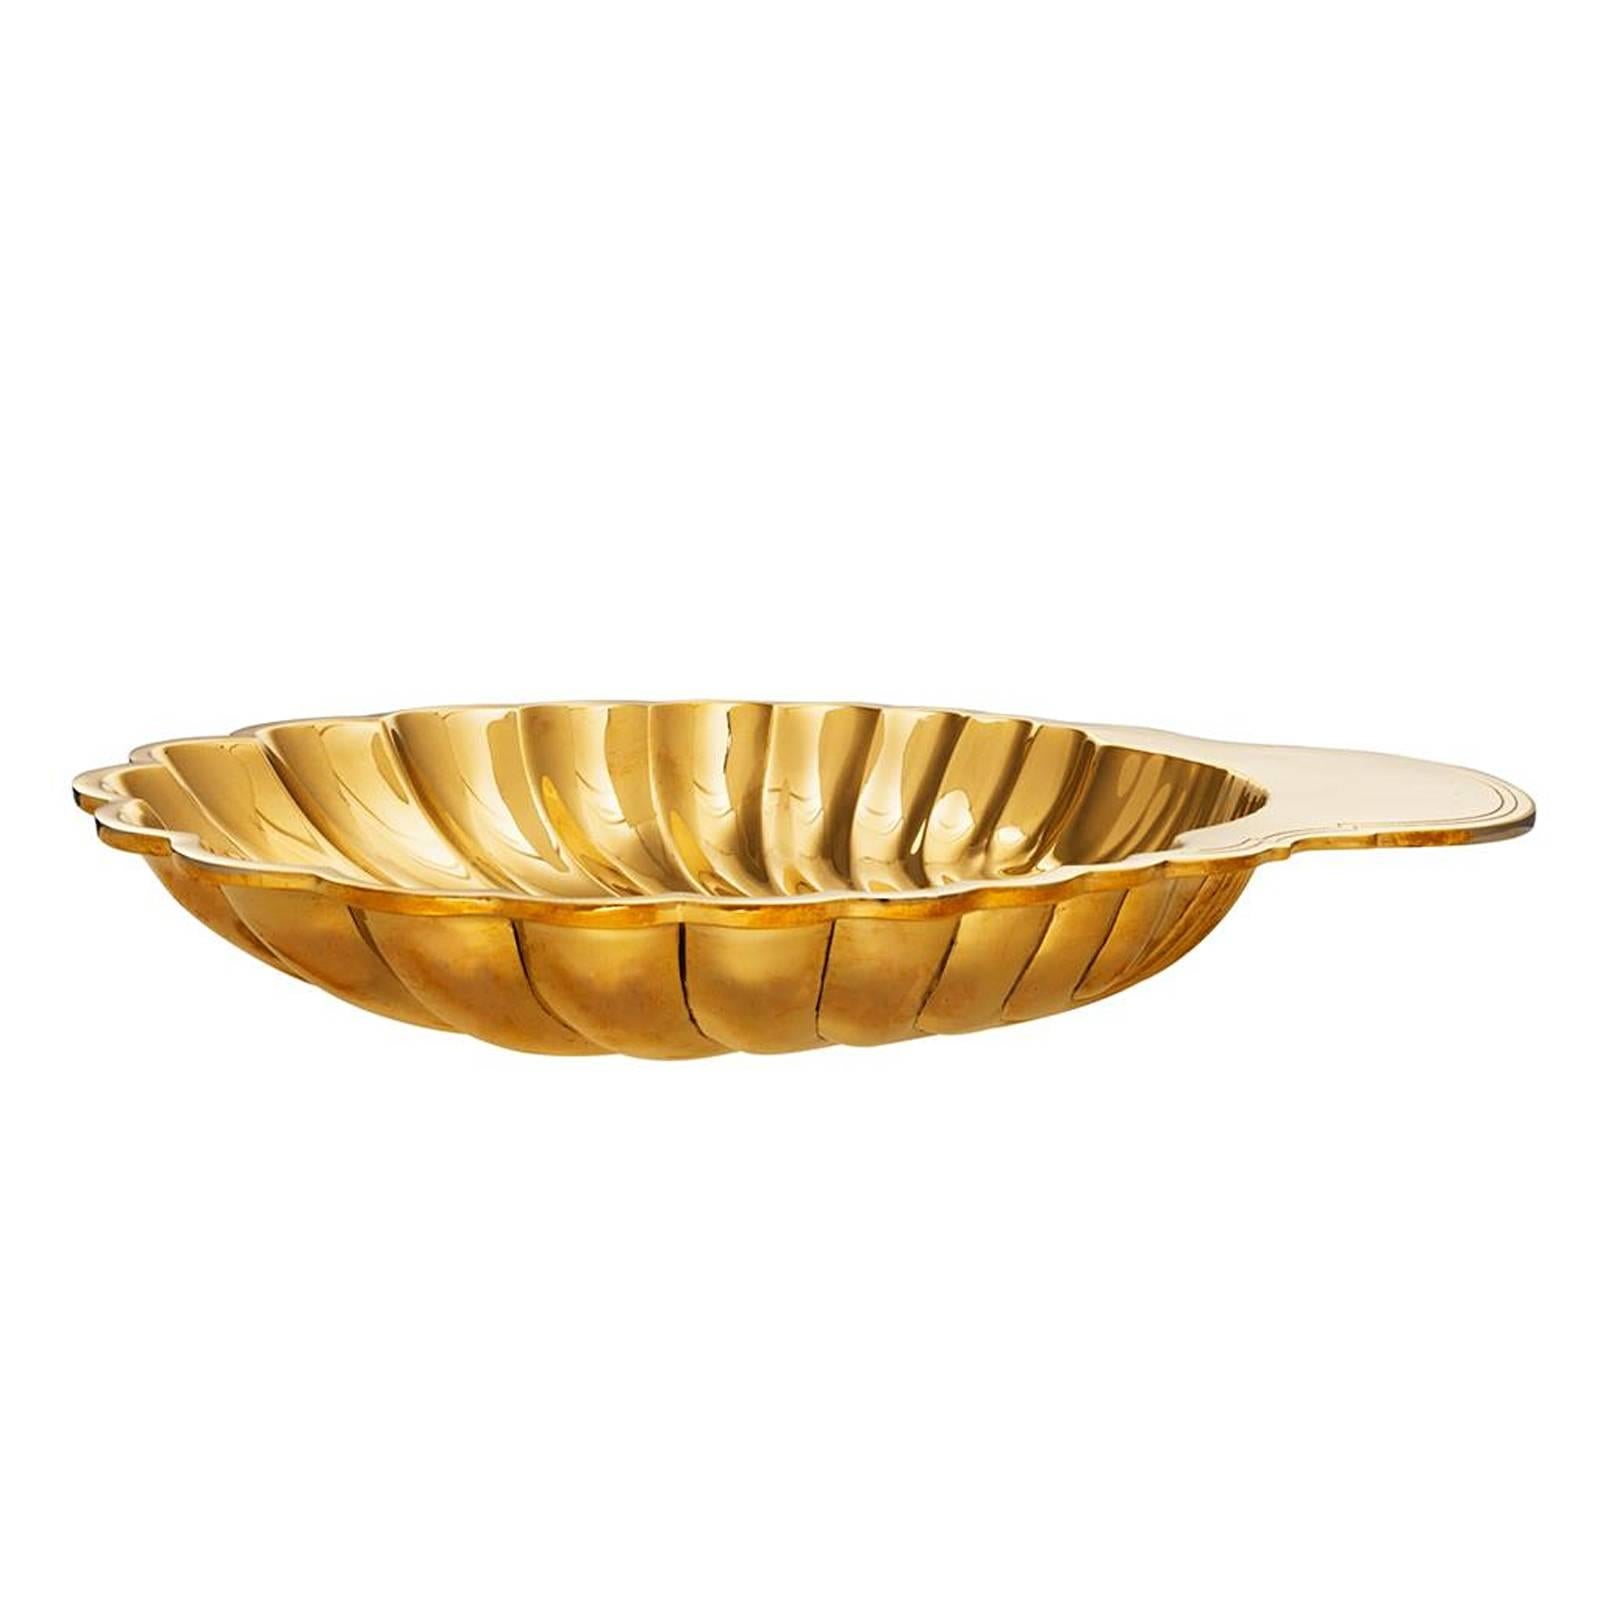 Indian Shell Tray in Polished Brass or in Nickel Finish